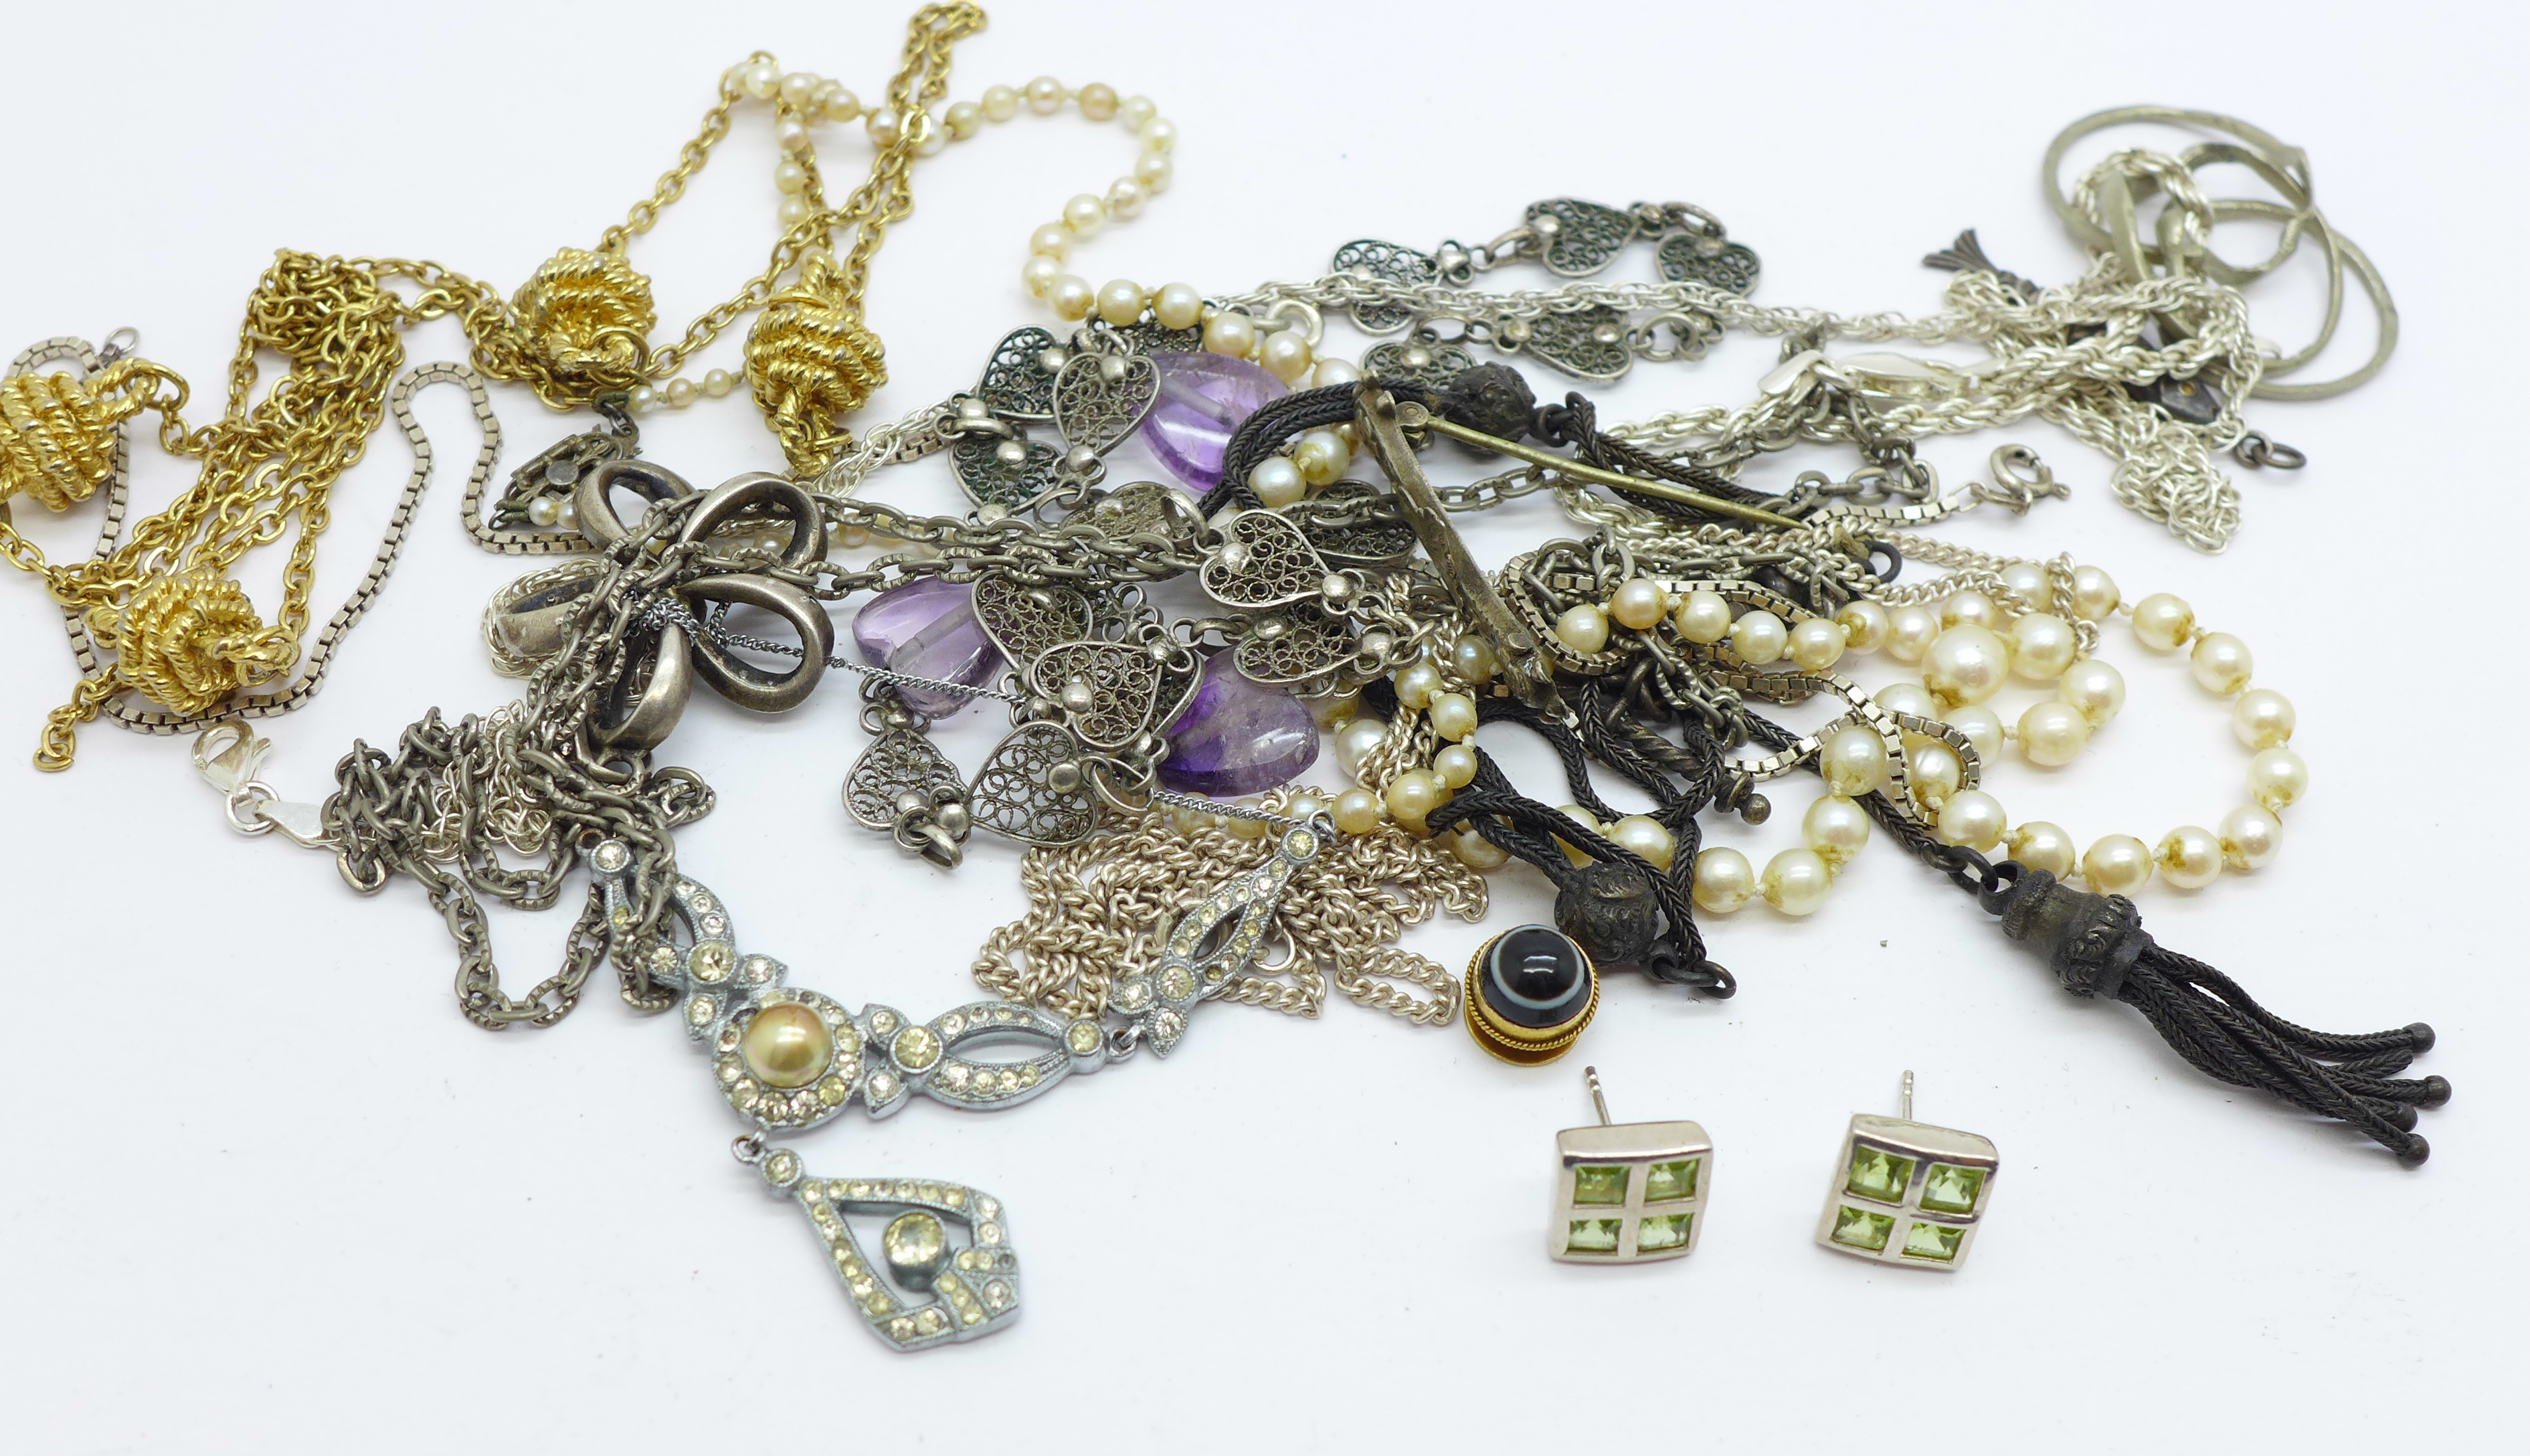 Costume jewellery including a silver brooch and a heart necklace